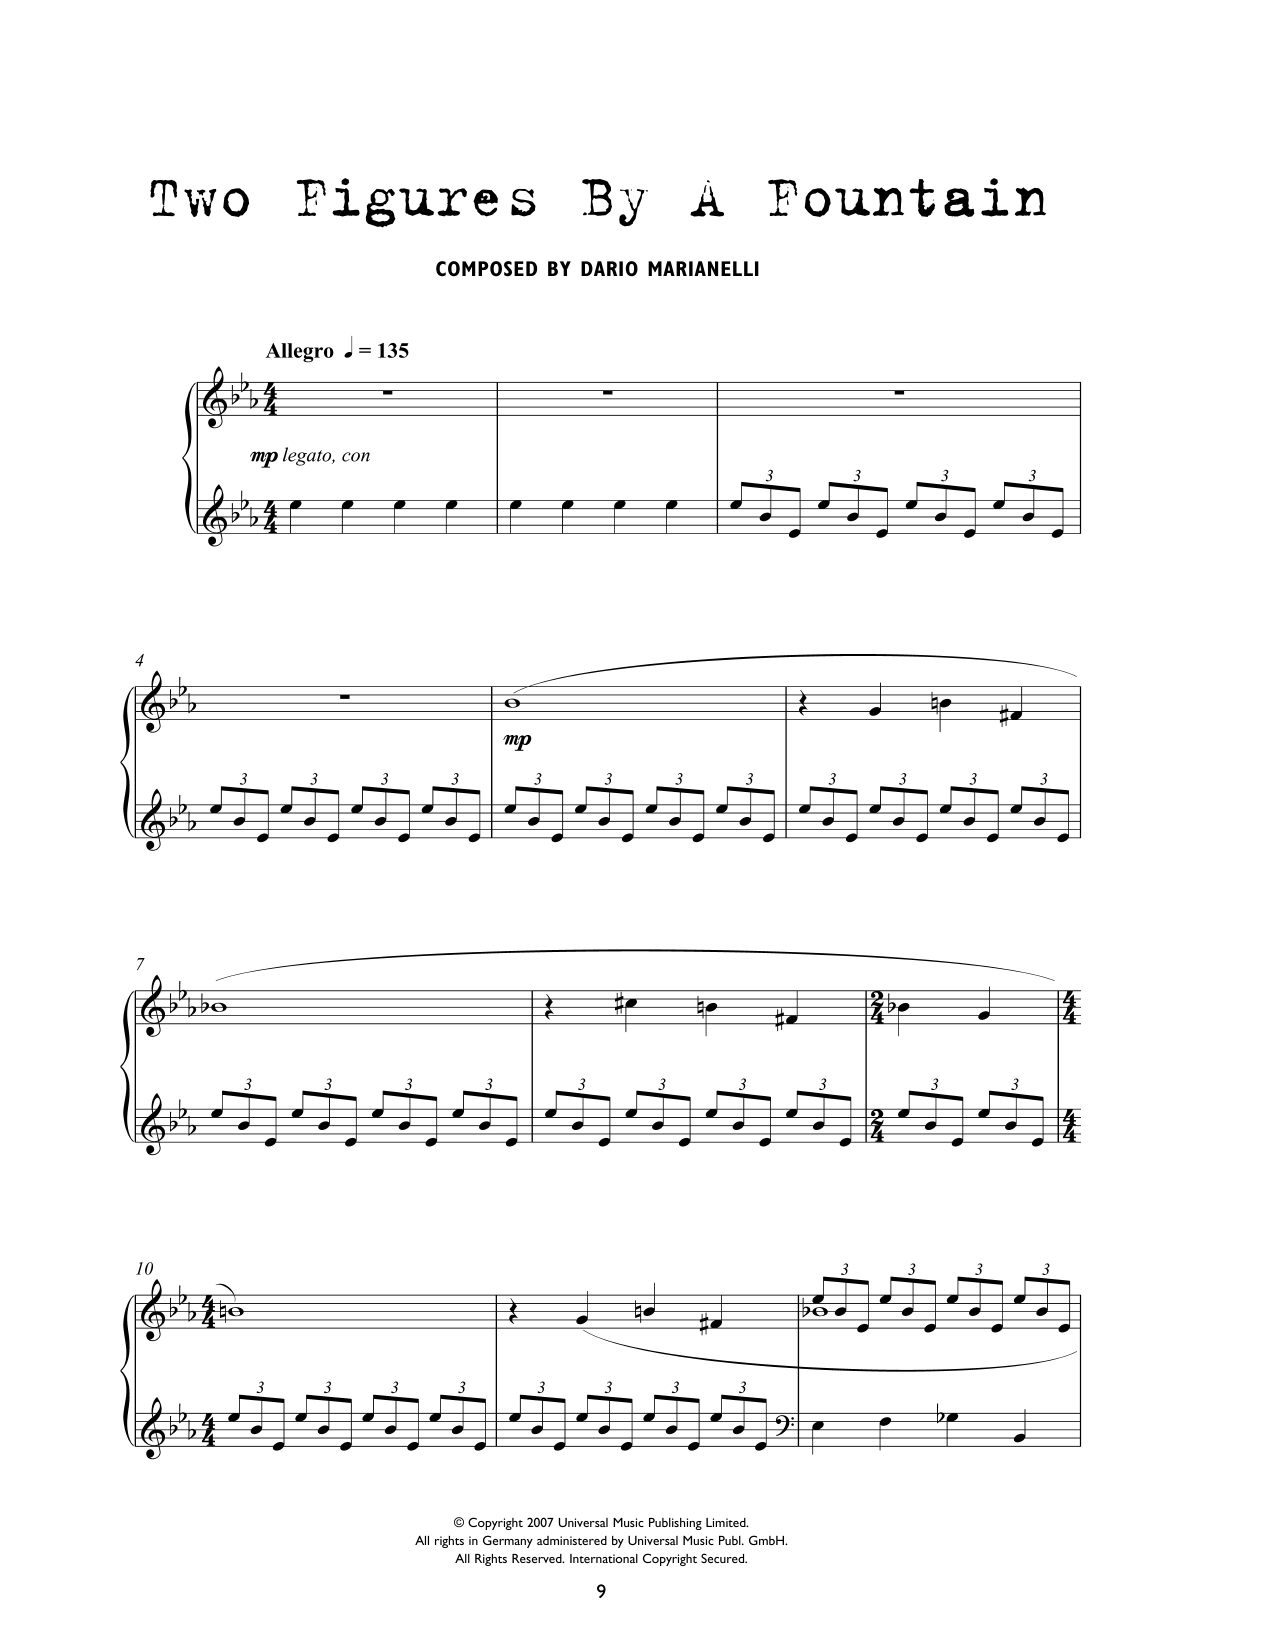 Download Dario Marianelli Two Figures By A Fountain (from Atoneme Sheet Music